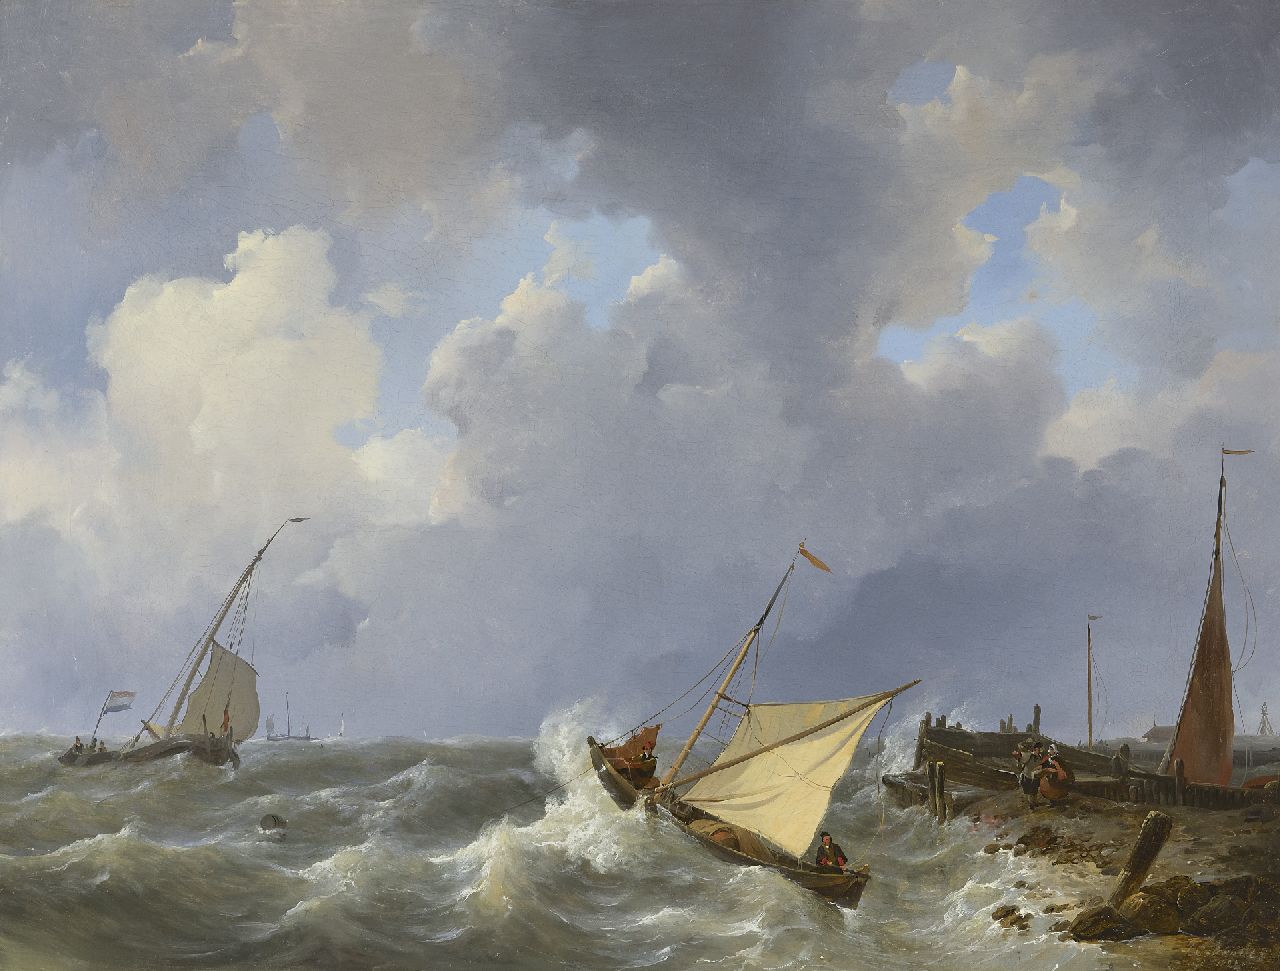 Schotel J.C.  | Johannes Christianus Schotel, Sailing ships on a choppy sea near a harbour, oil on canvas 55.6 x 73.4 cm, signed l.r. and dated 1825